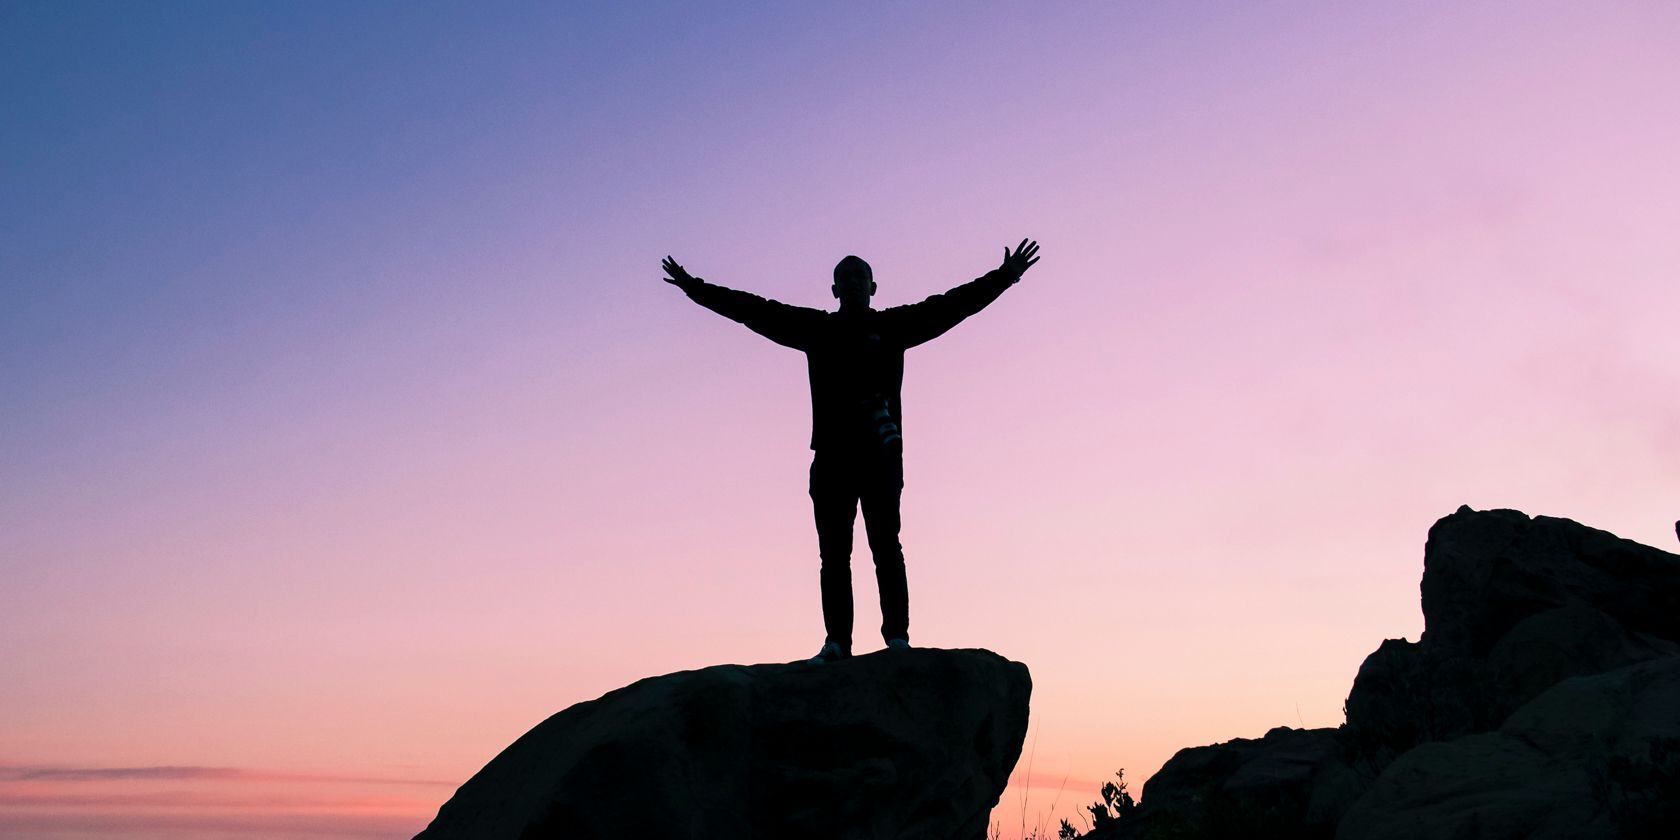 A man stands with arms outstretched at the top of a mountain at sunset